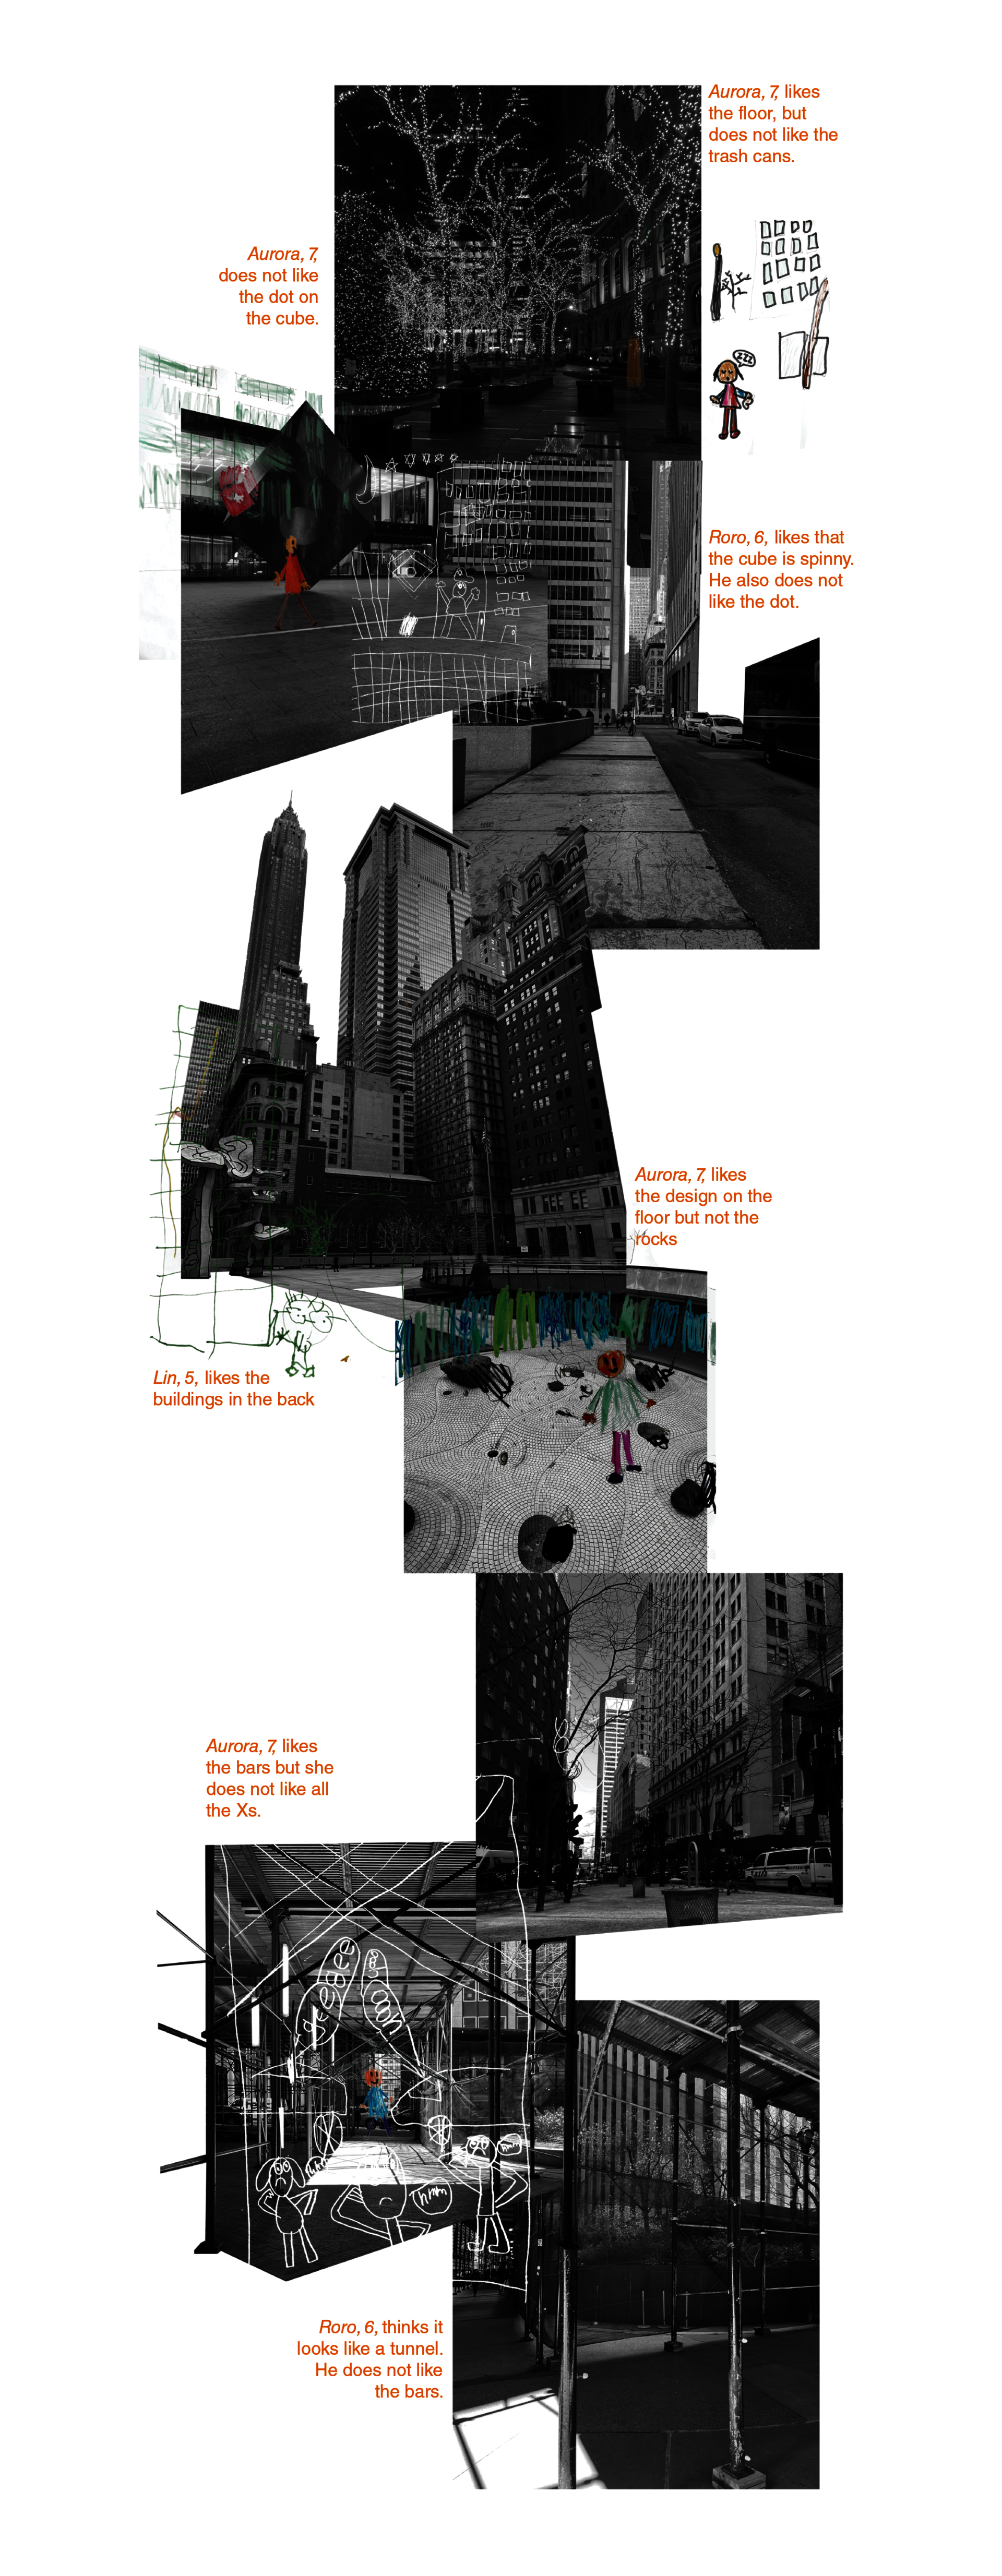 A collage stringing together images of the four chosen sites in New York City with an overlay of drawings of children